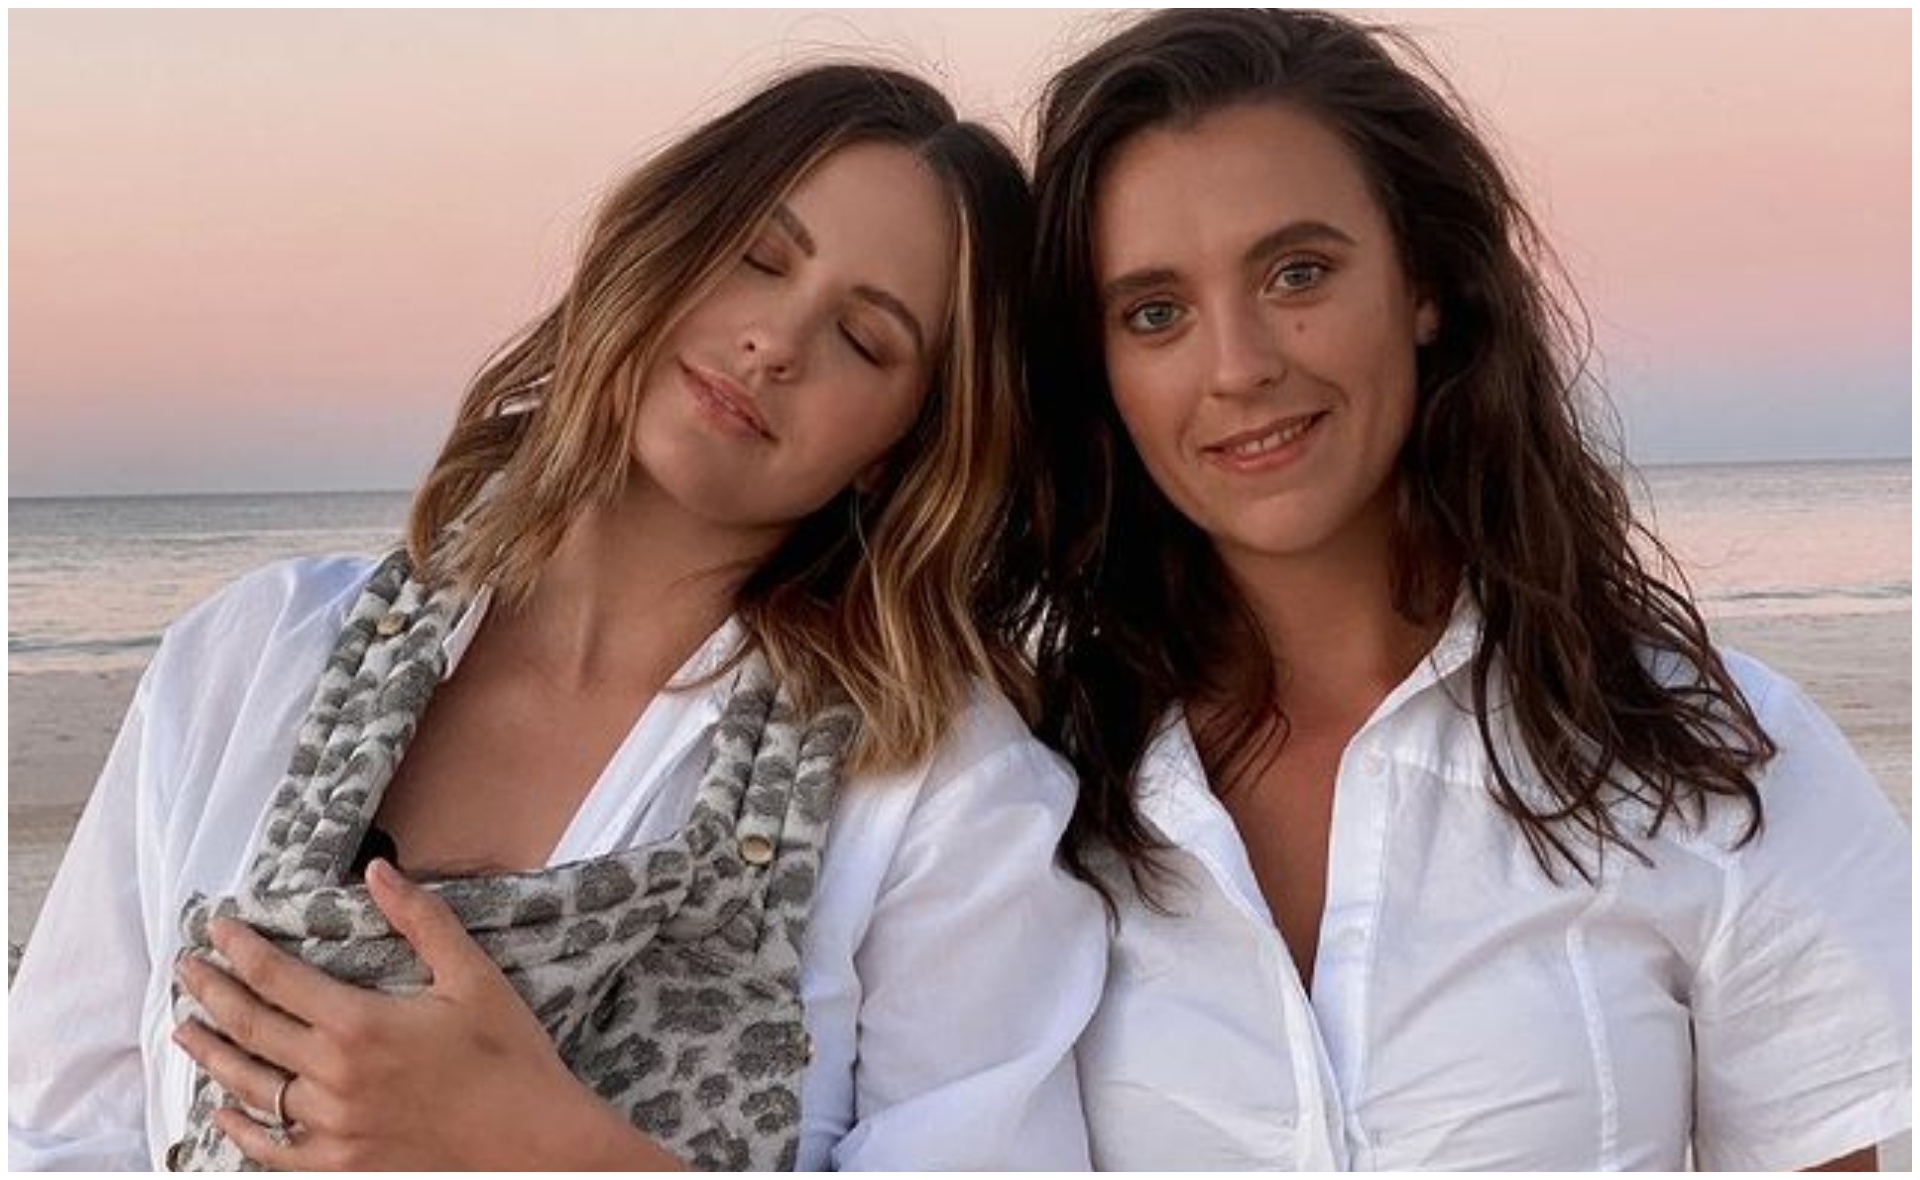 Jesinta Franklin’s enlightening postpartum tip for new mums who need “just as much nurturing, love & care”